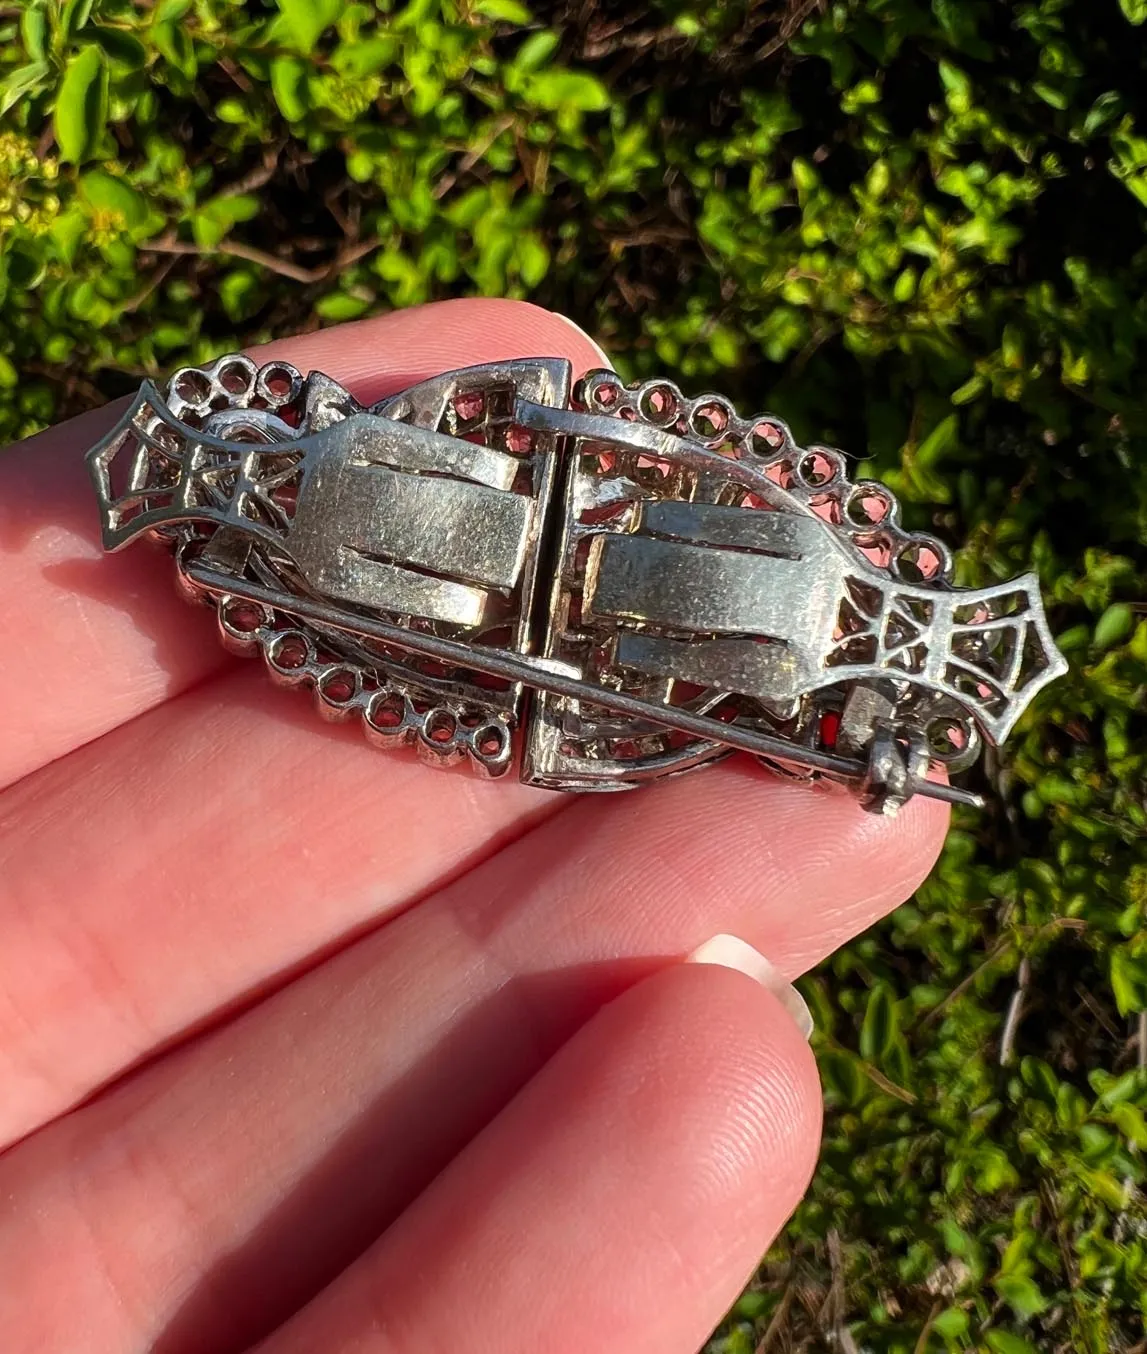 Back of Indian silver double dress clip brooch held in a hand in front of greenery